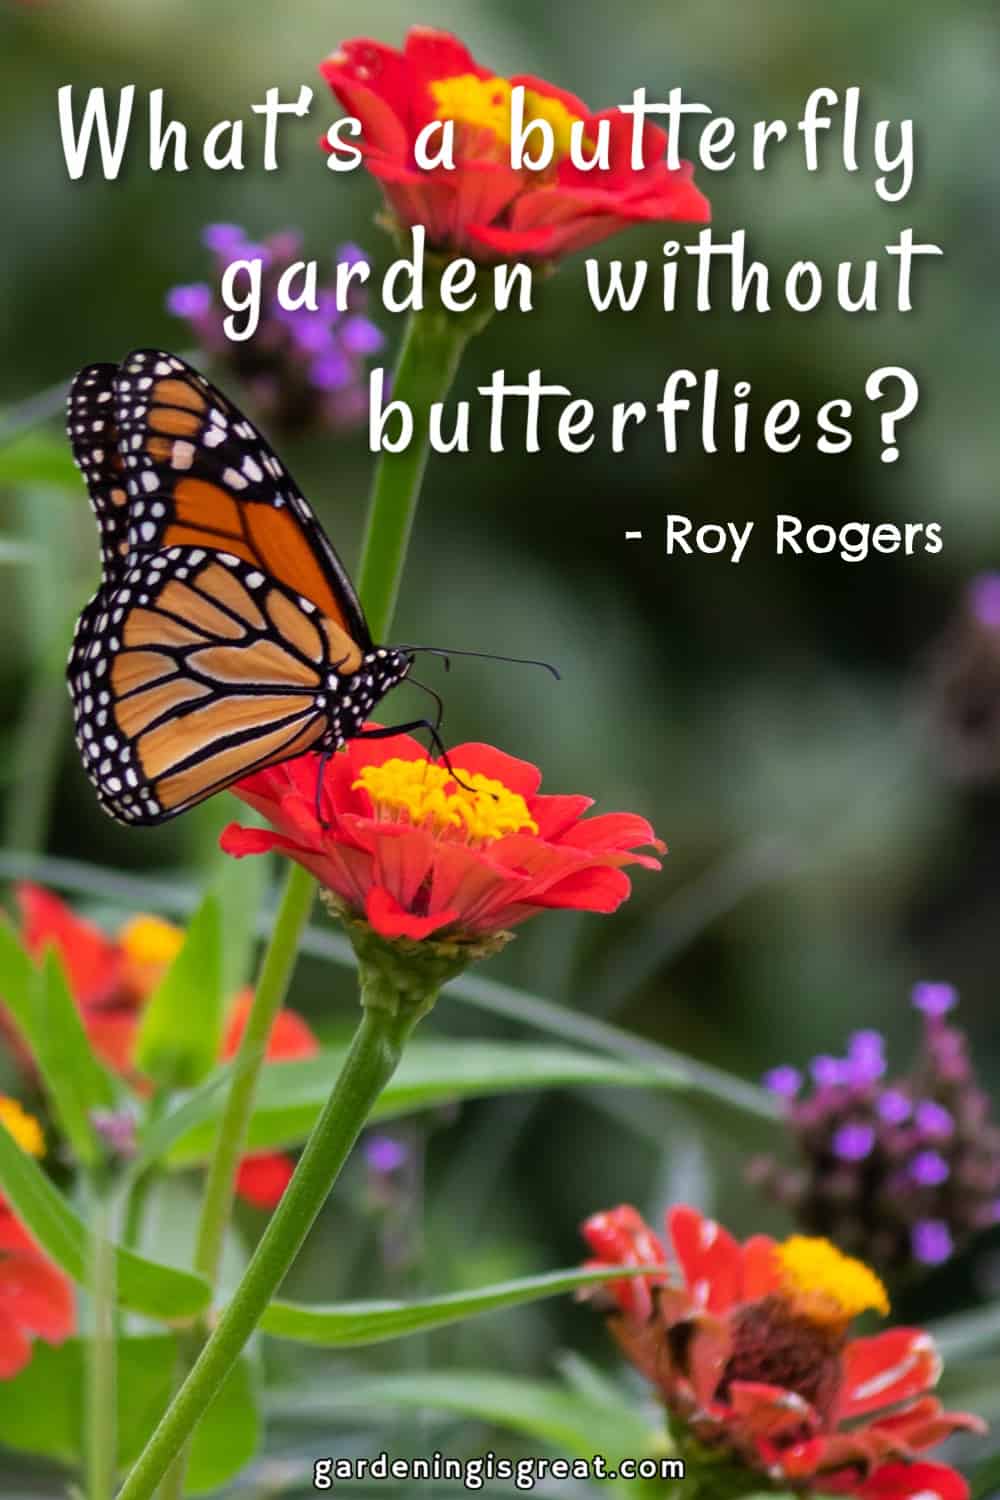 “What’s a butterfly garden without butterflies?” – Roy Rogers